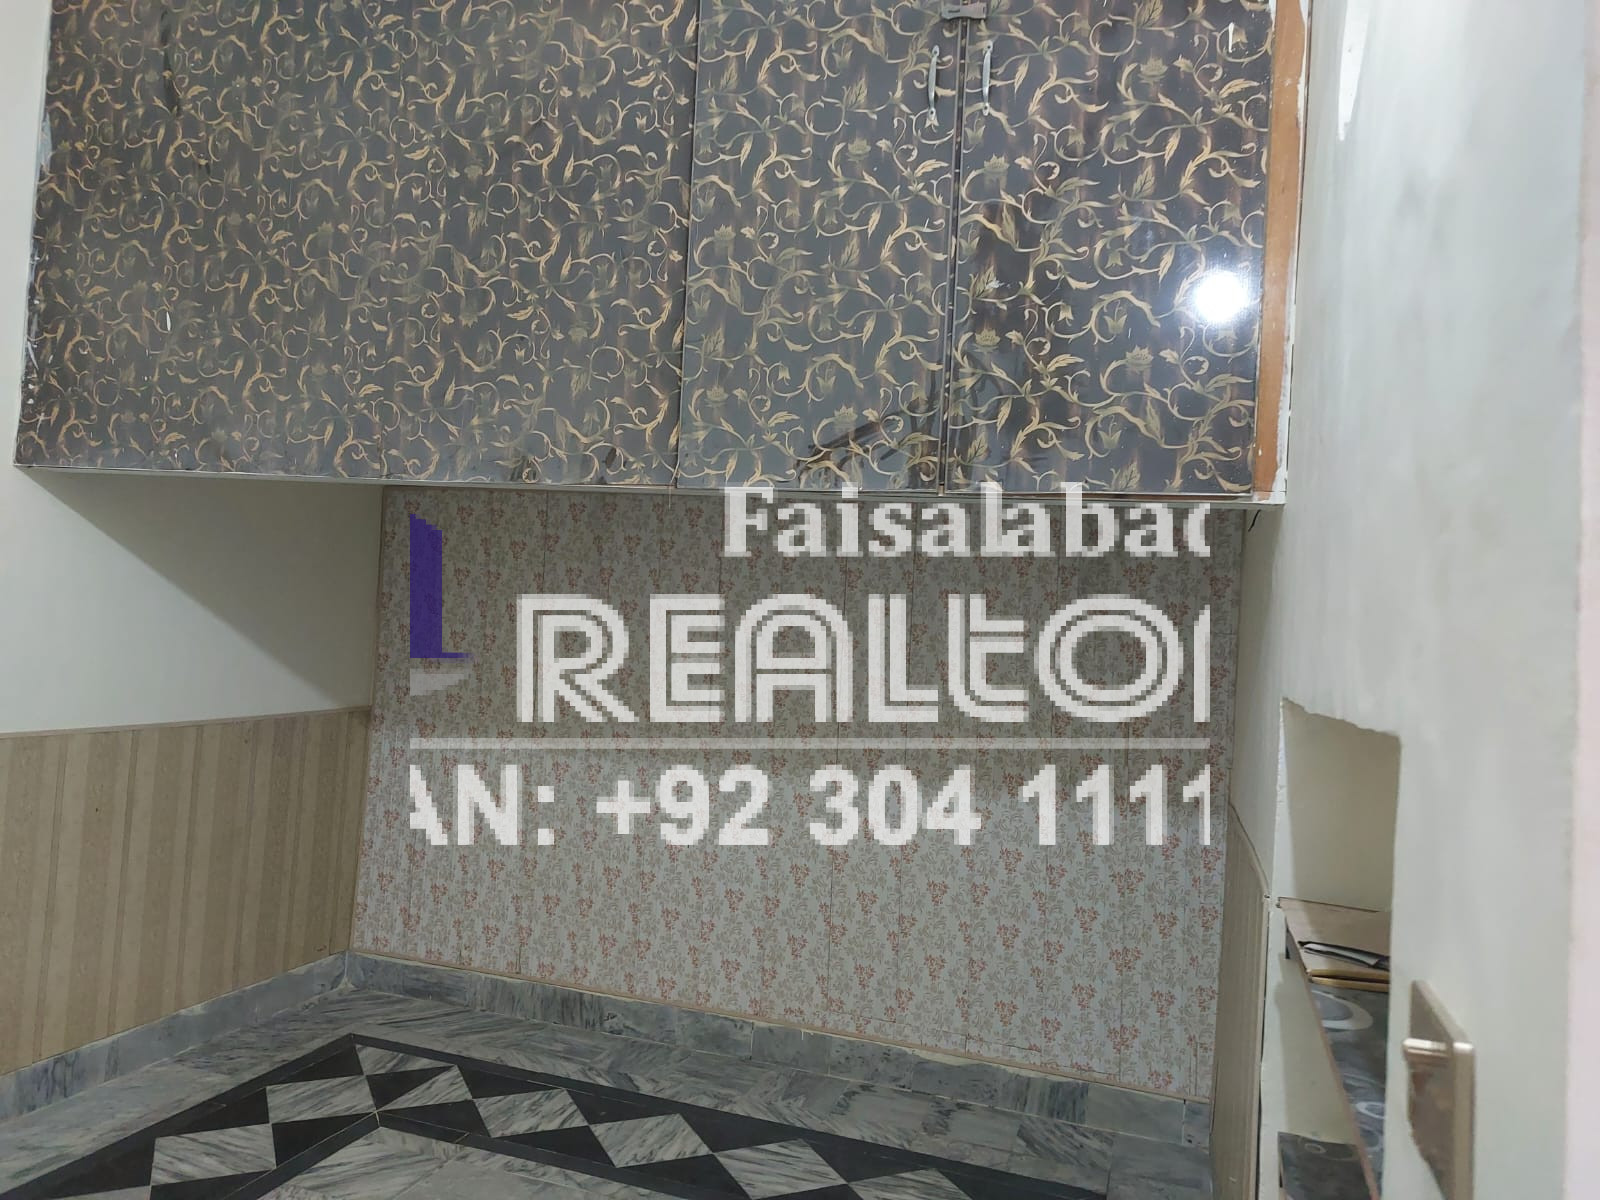 5 House For Rent in Faisalabad - Faisalabad Realtors